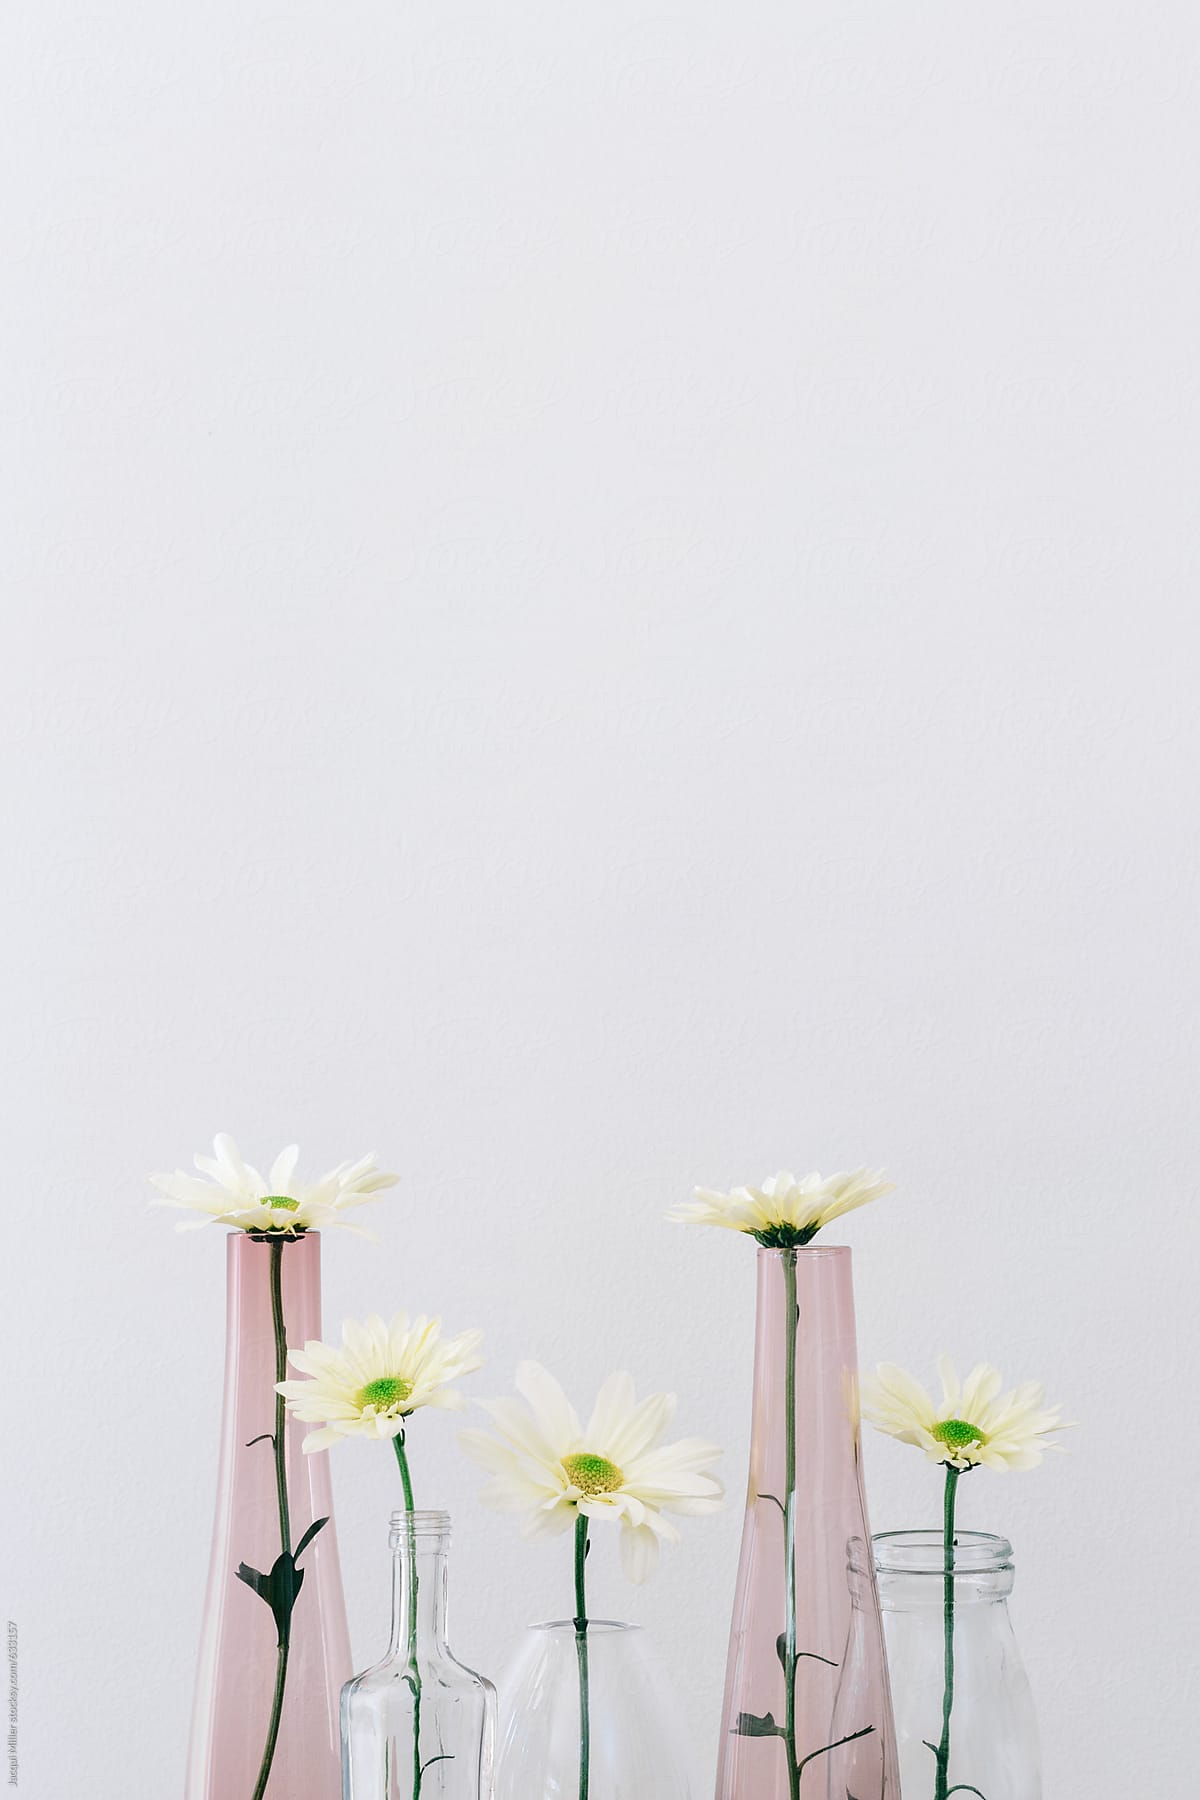 Collection of glass vases and bottles with a single daisy flower in each, with copyspace